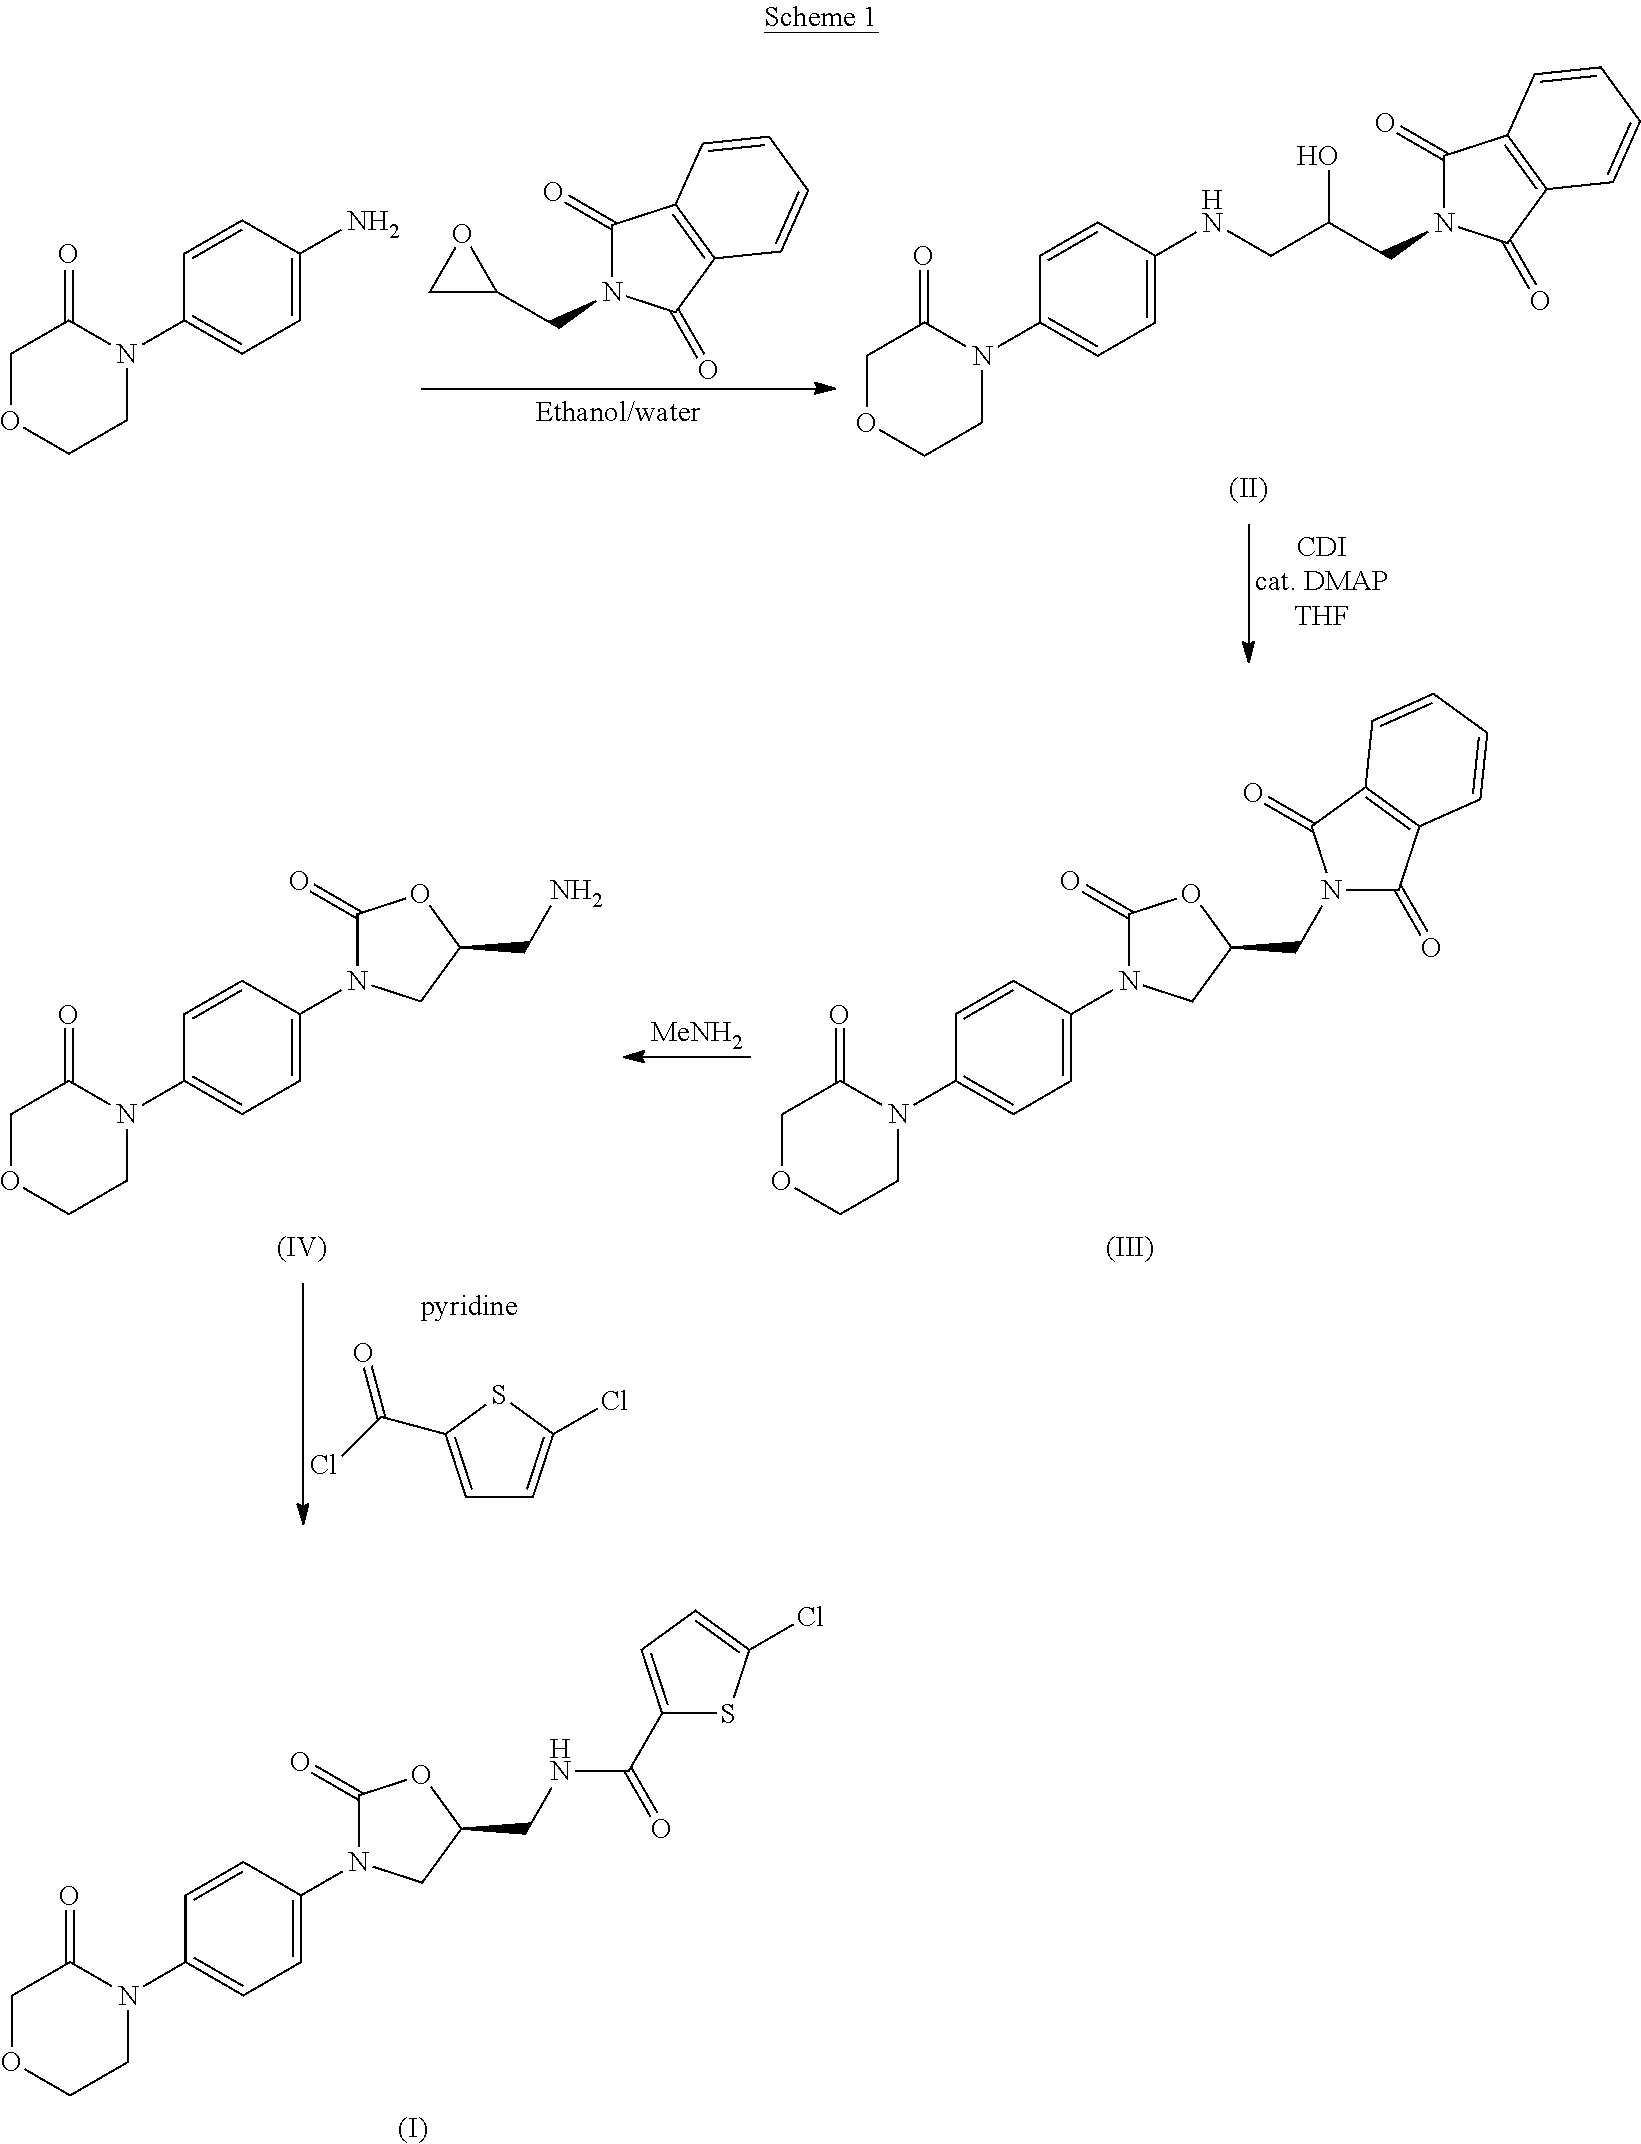 Process for Determining the Suitability for Distribution of a Batch of Thiophene-2-Carboxamide Derivative